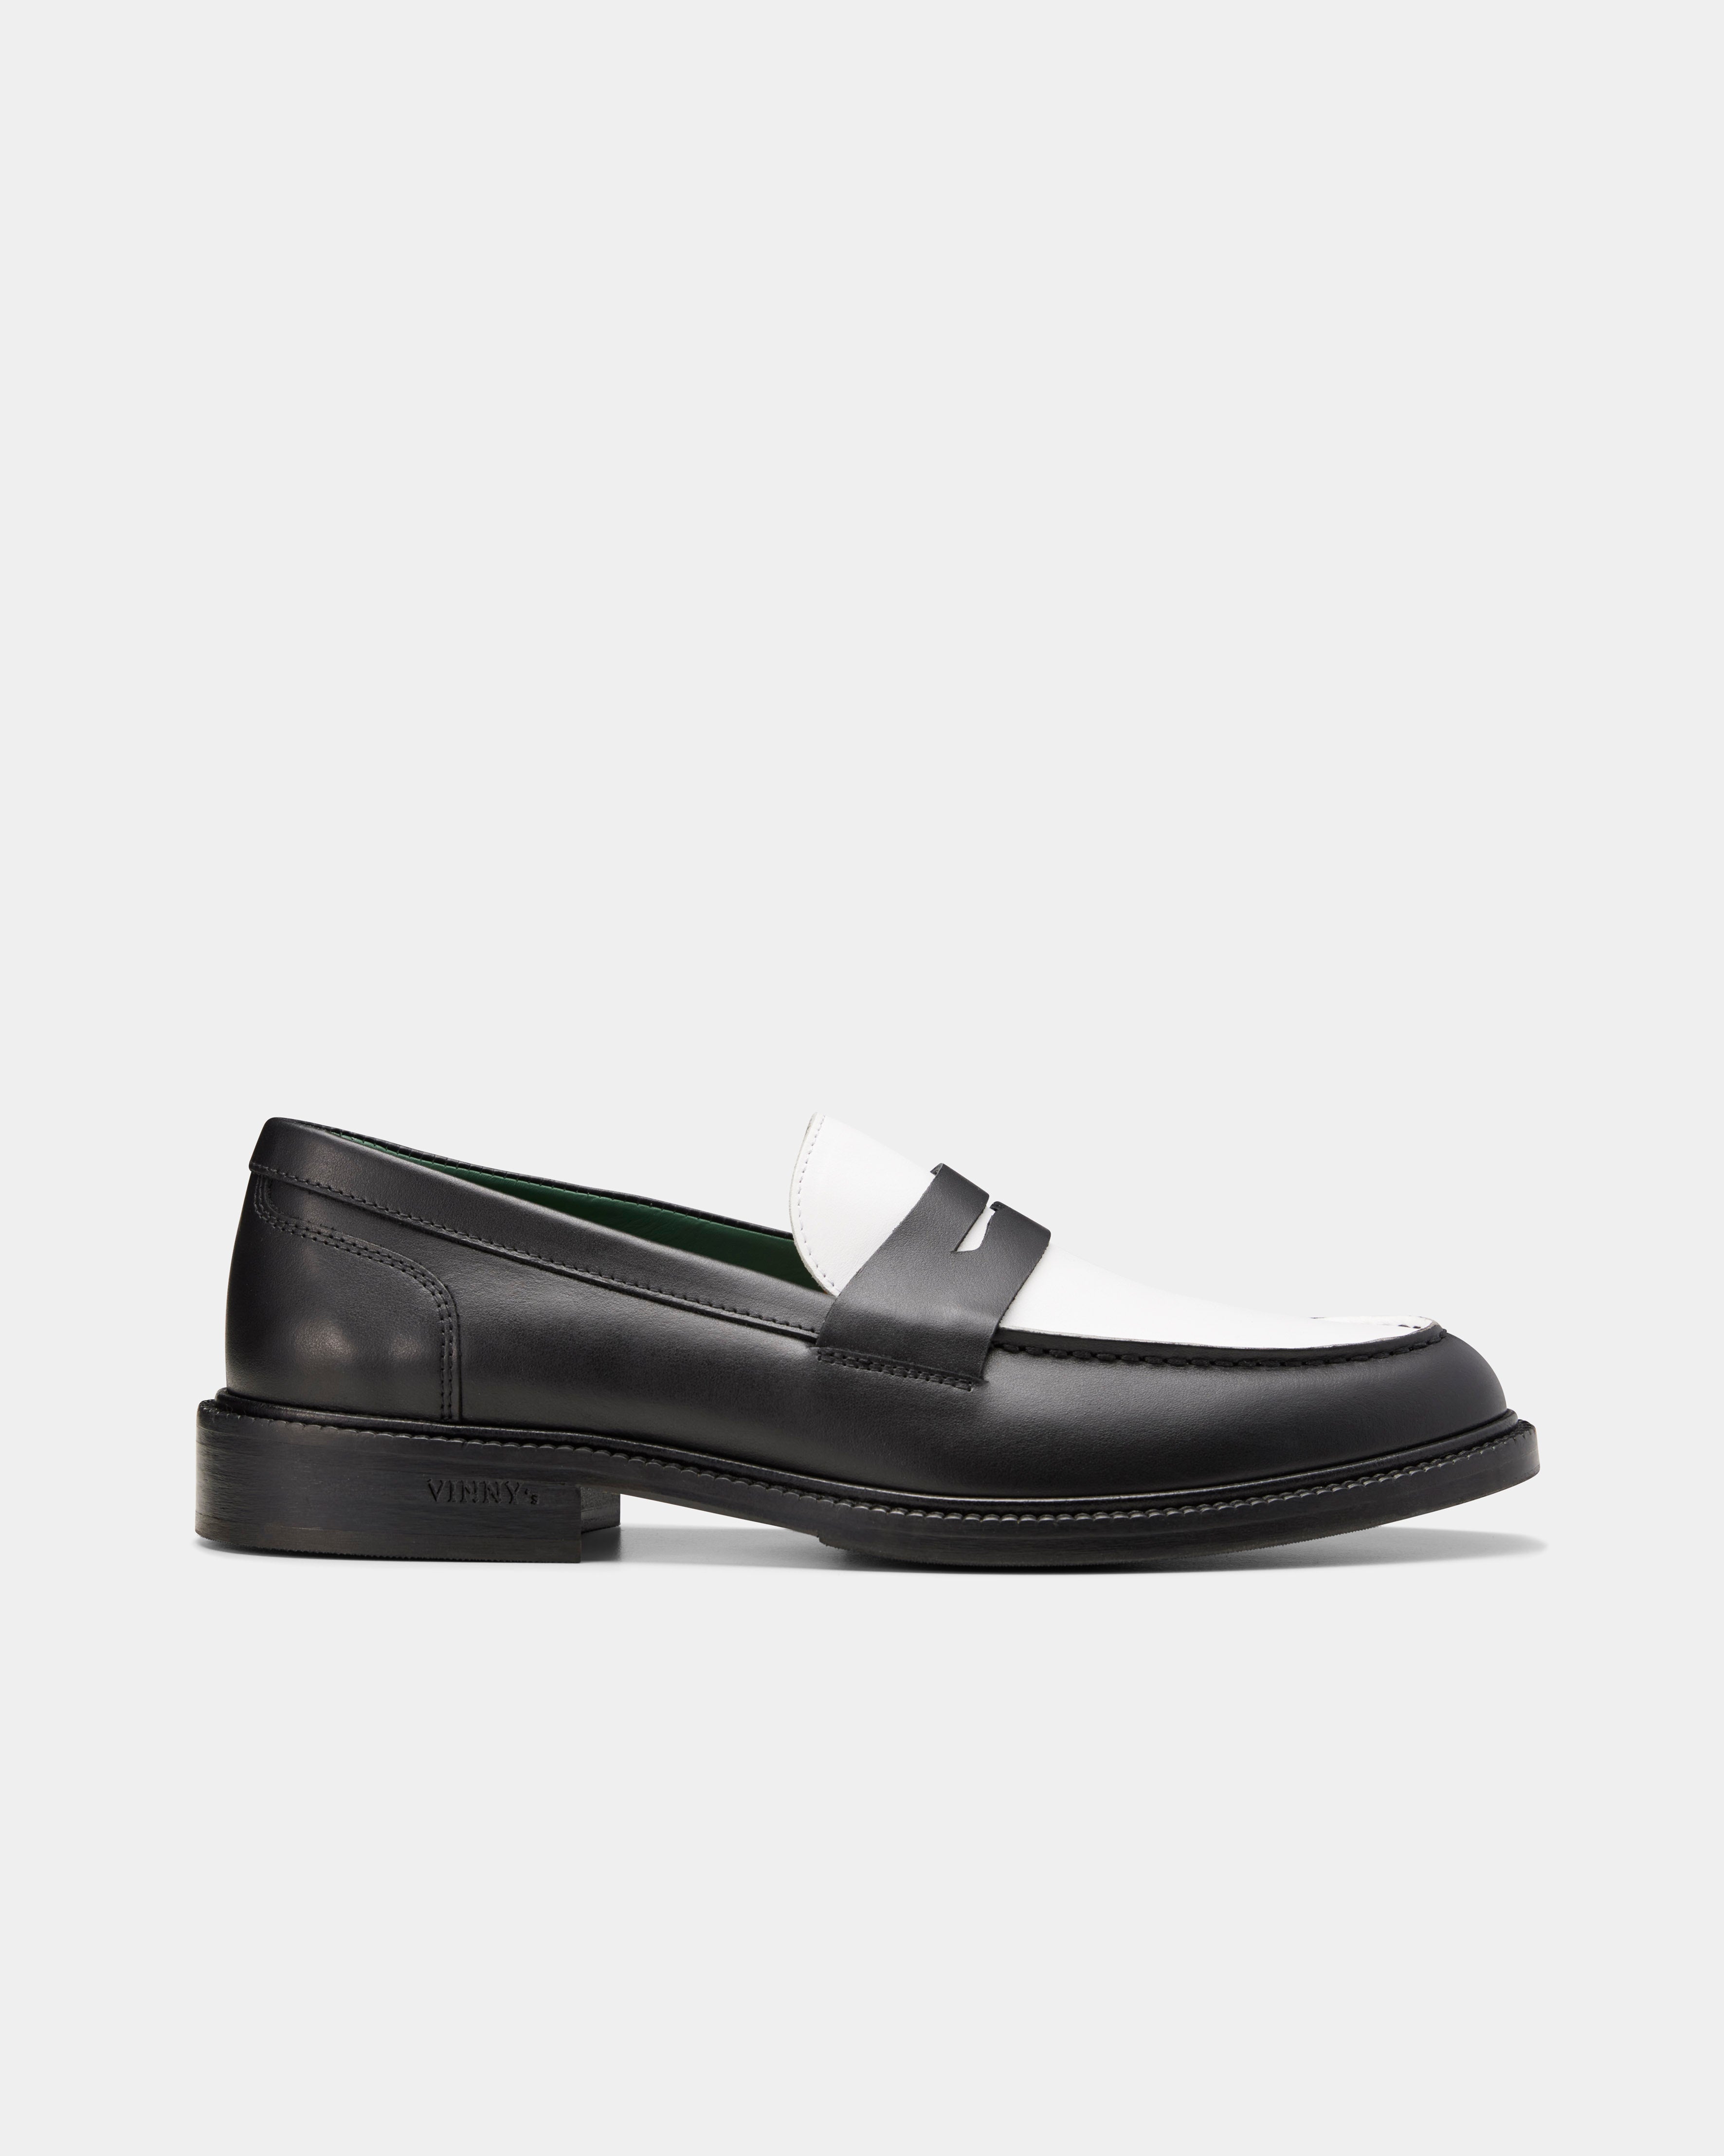 Men's loafers - Townee Two-Tone In Black And White - VINNY's